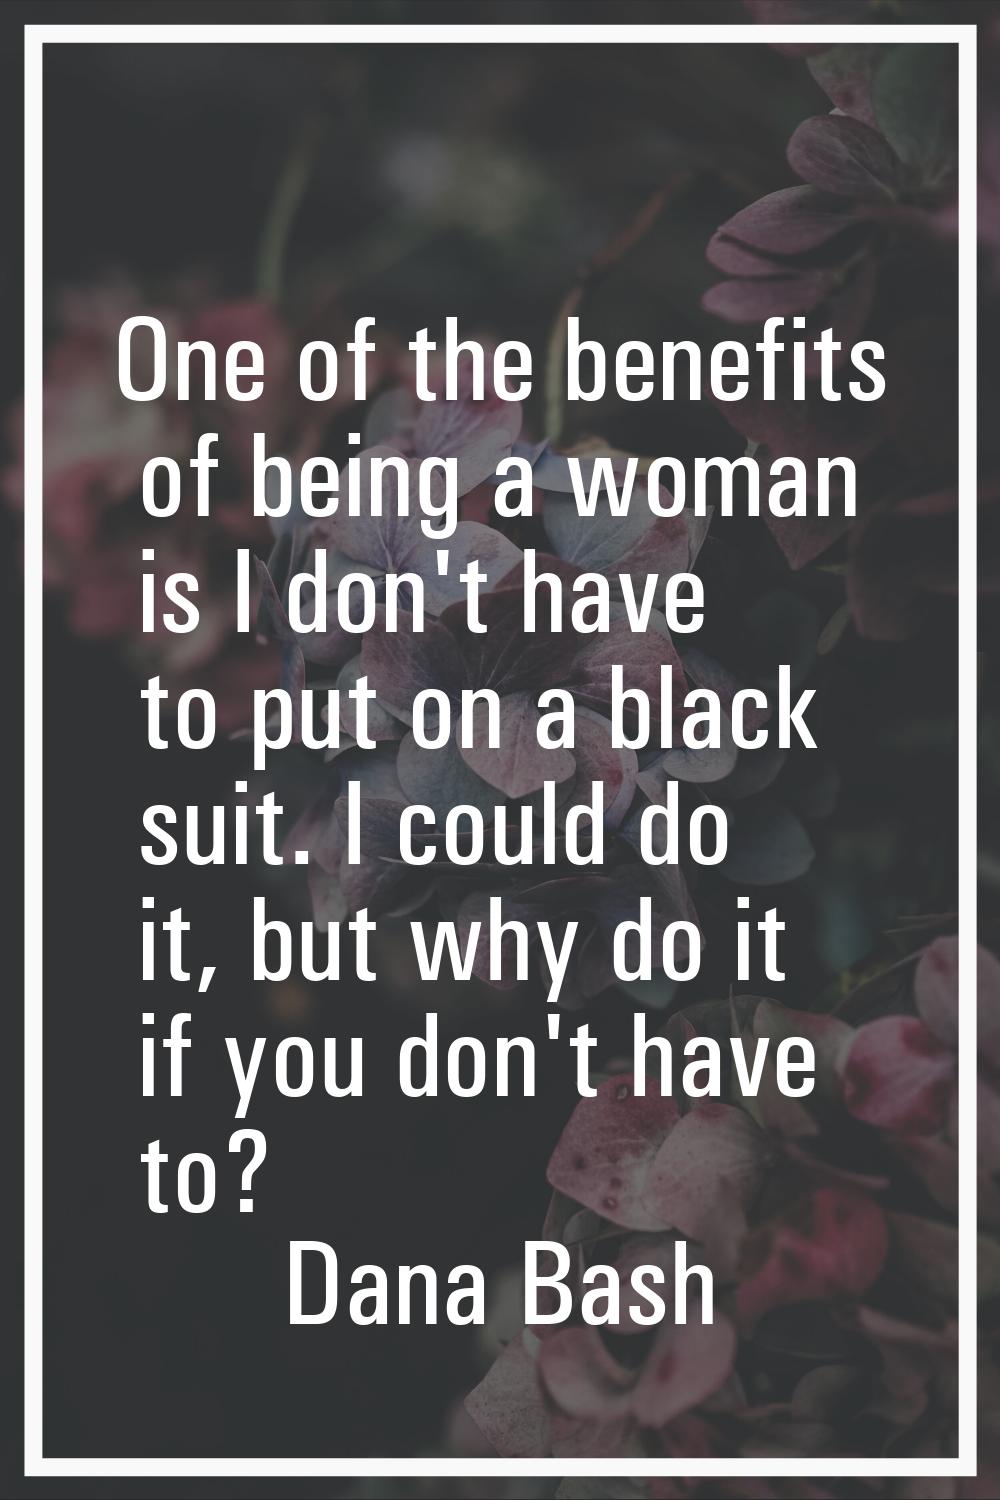 One of the benefits of being a woman is I don't have to put on a black suit. I could do it, but why